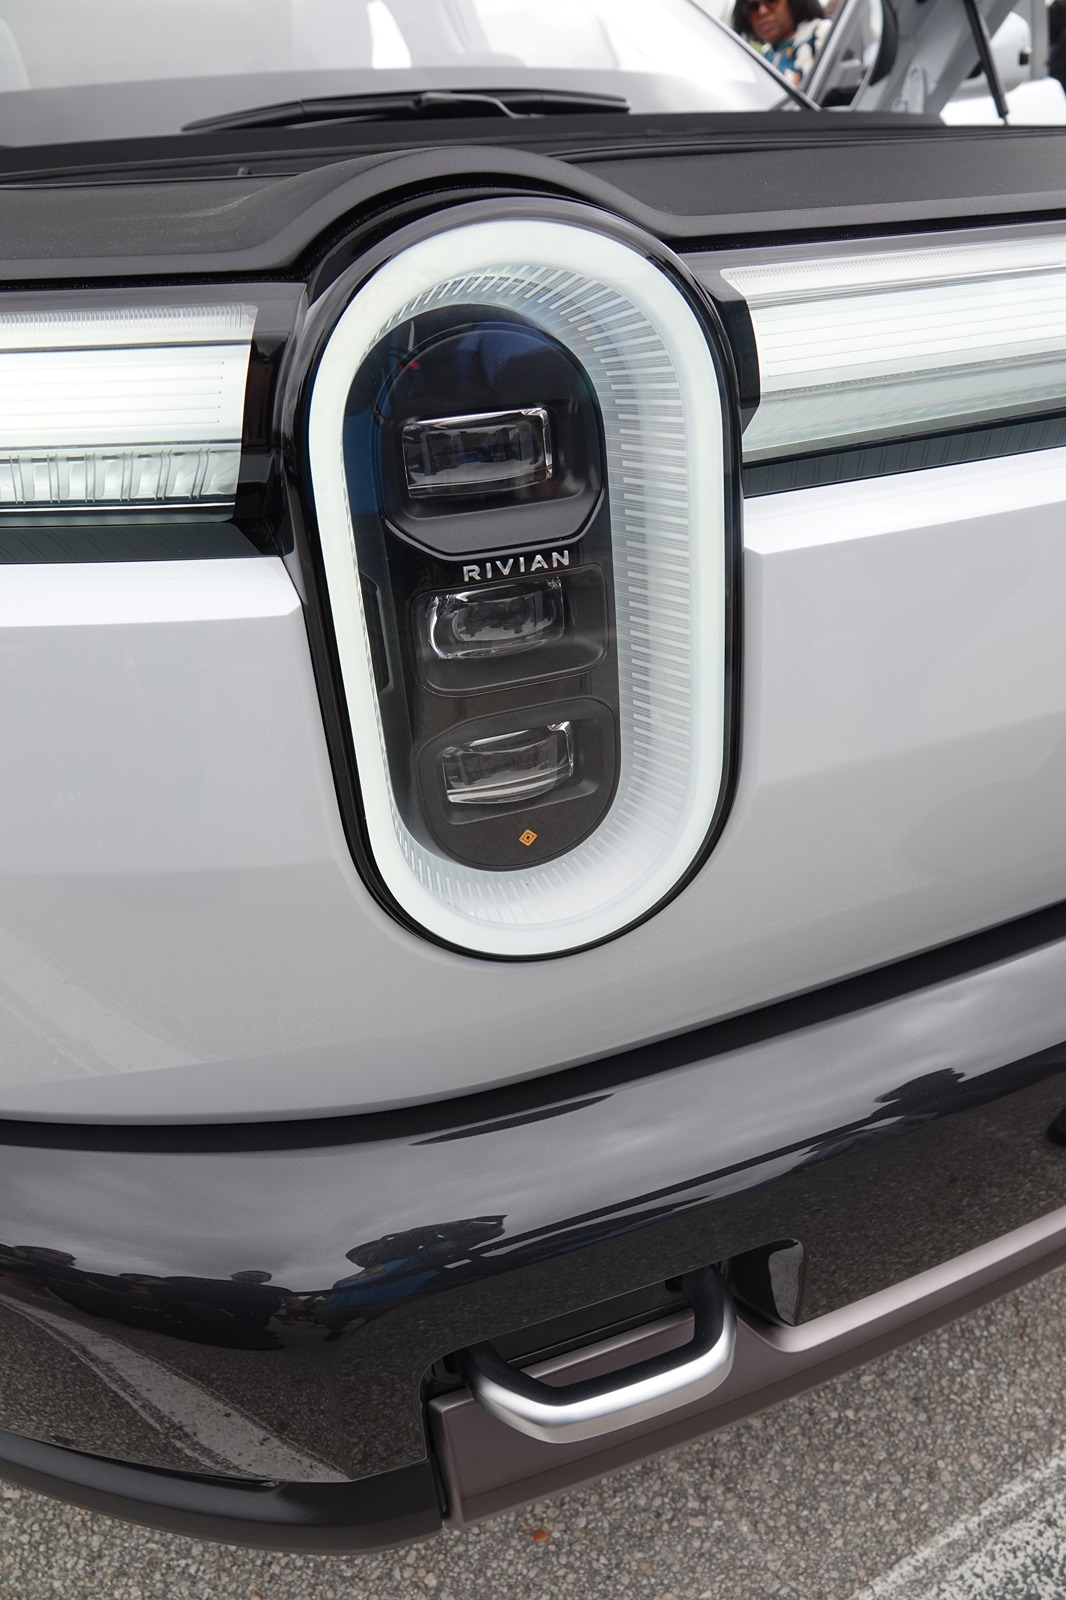 Rivian R1T R1S See the R2 @ Electrify Expo Orlando today 3/17 from 10am-5pm DSC06085.JPG